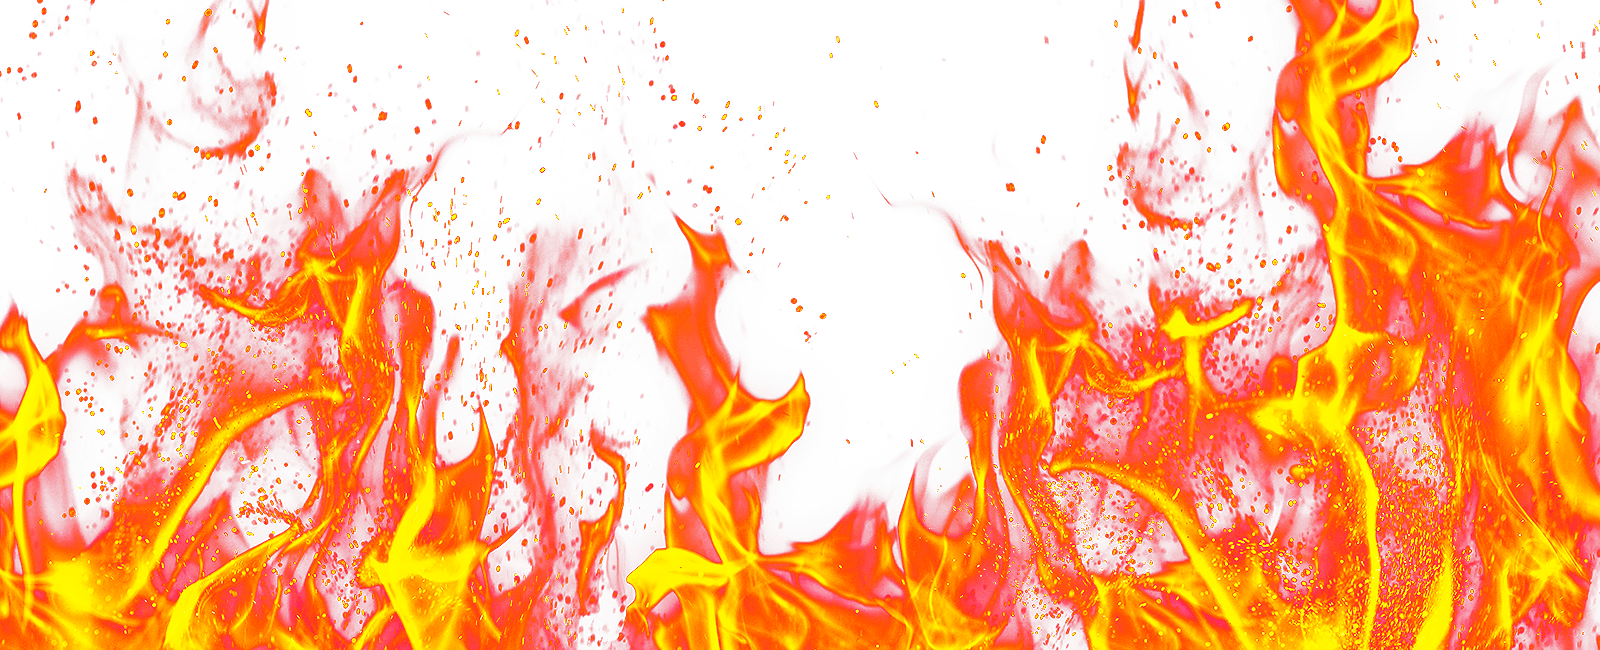 Png File Name: Fire Png Image Dimension: 1600X650. Image Type: .png. Posted On: Jul 22Nd, 2016. Category: Nature Tags: Fire - Fire, Transparent background PNG HD thumbnail